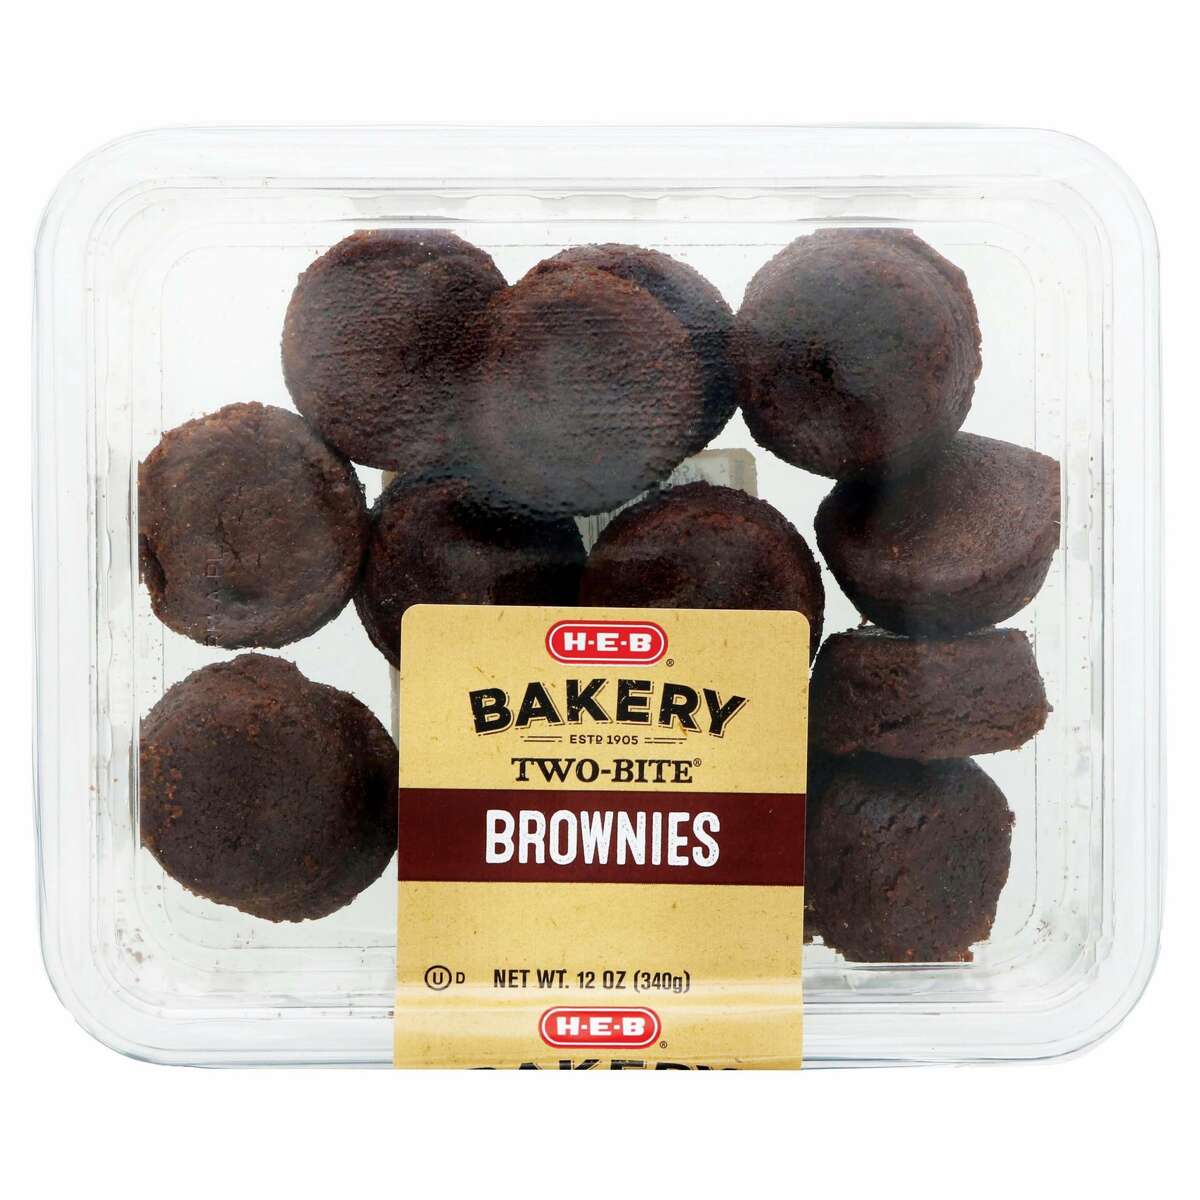 H-E-B Two-Bite Brownies "OMG yes! How could I have forgotten the brownie bites. I wish I was exaggerating but I could eat an entire box if I wanted to," houstonwa wrote.